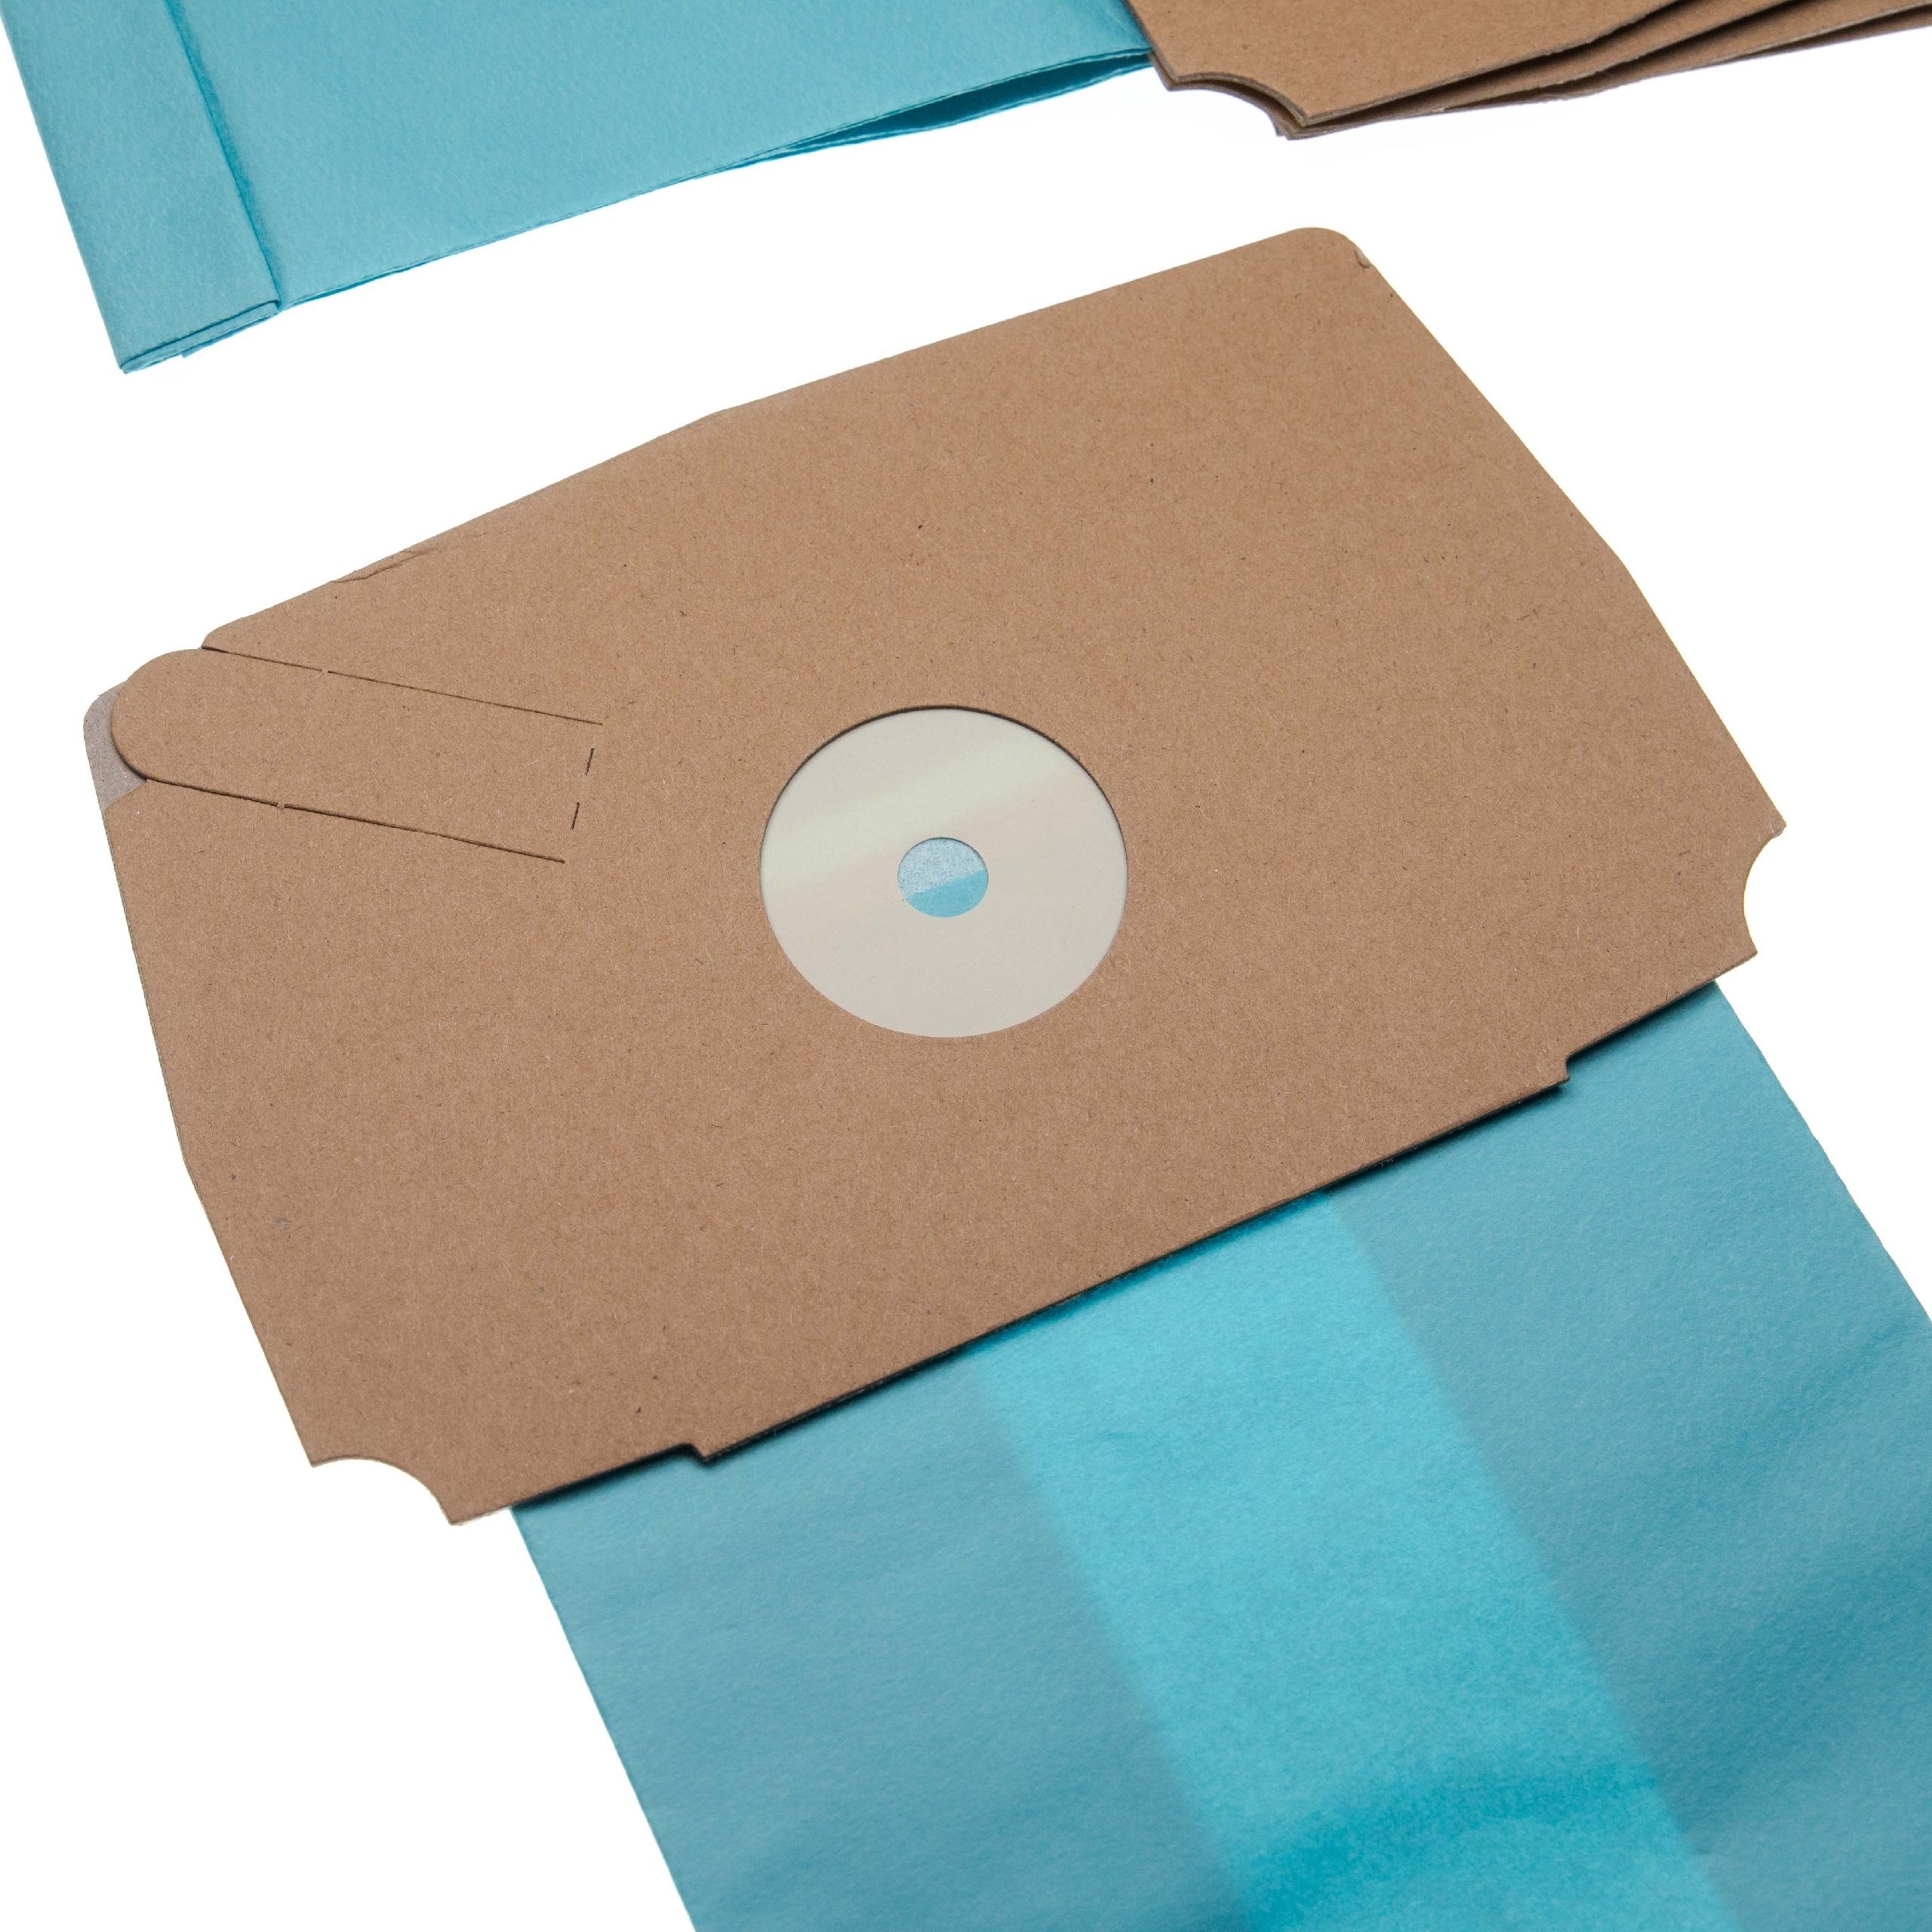 5x Vacuum Cleaner Bag replaces Electrolux / Lux 11585004 for Electrolux / Lux - paper